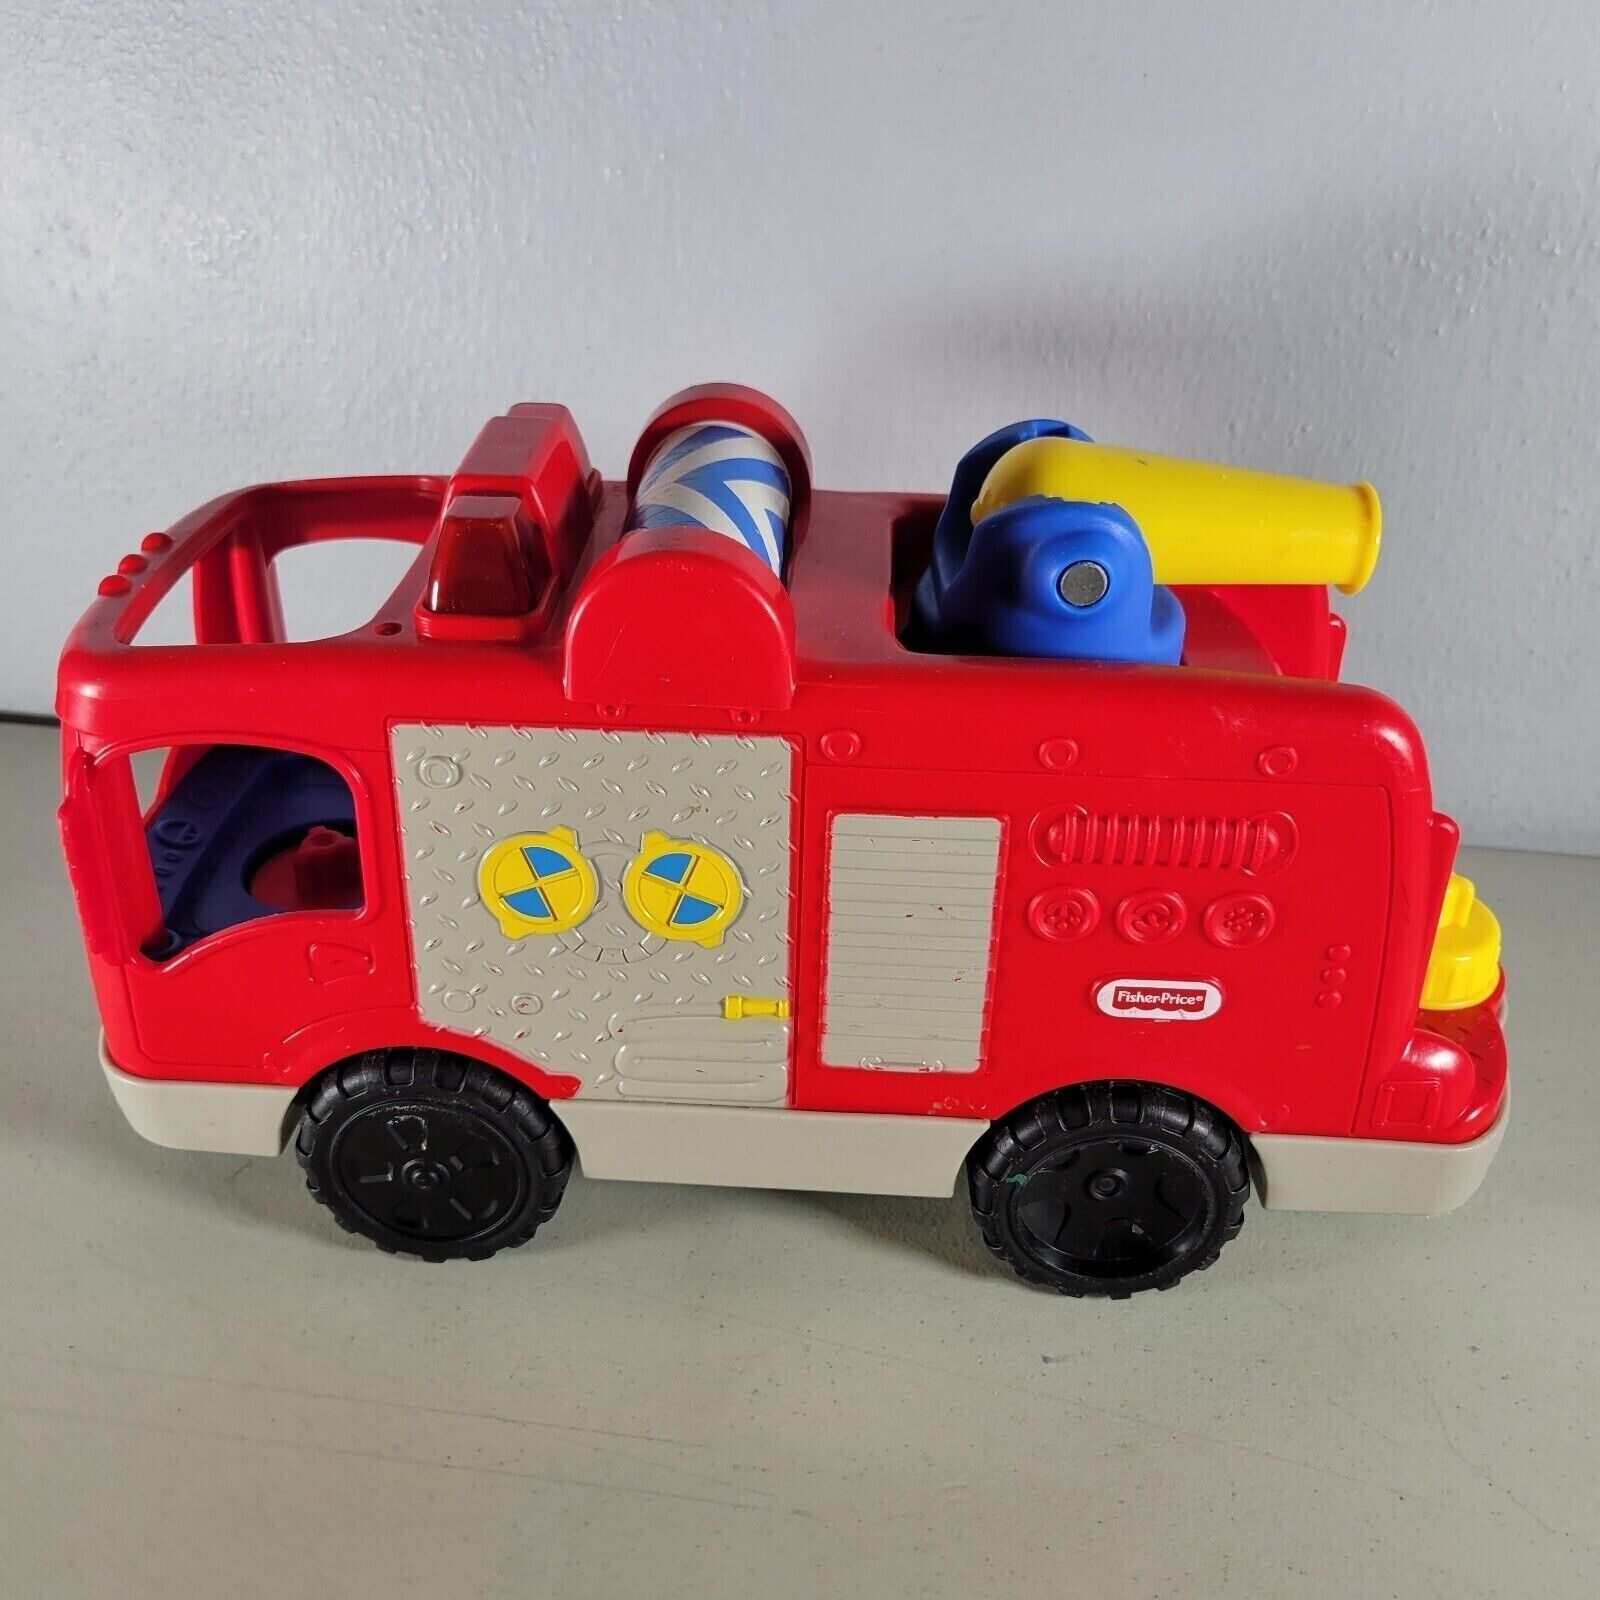 Fisher Price Fire Truck Toy Little People Helping Others - $9.96